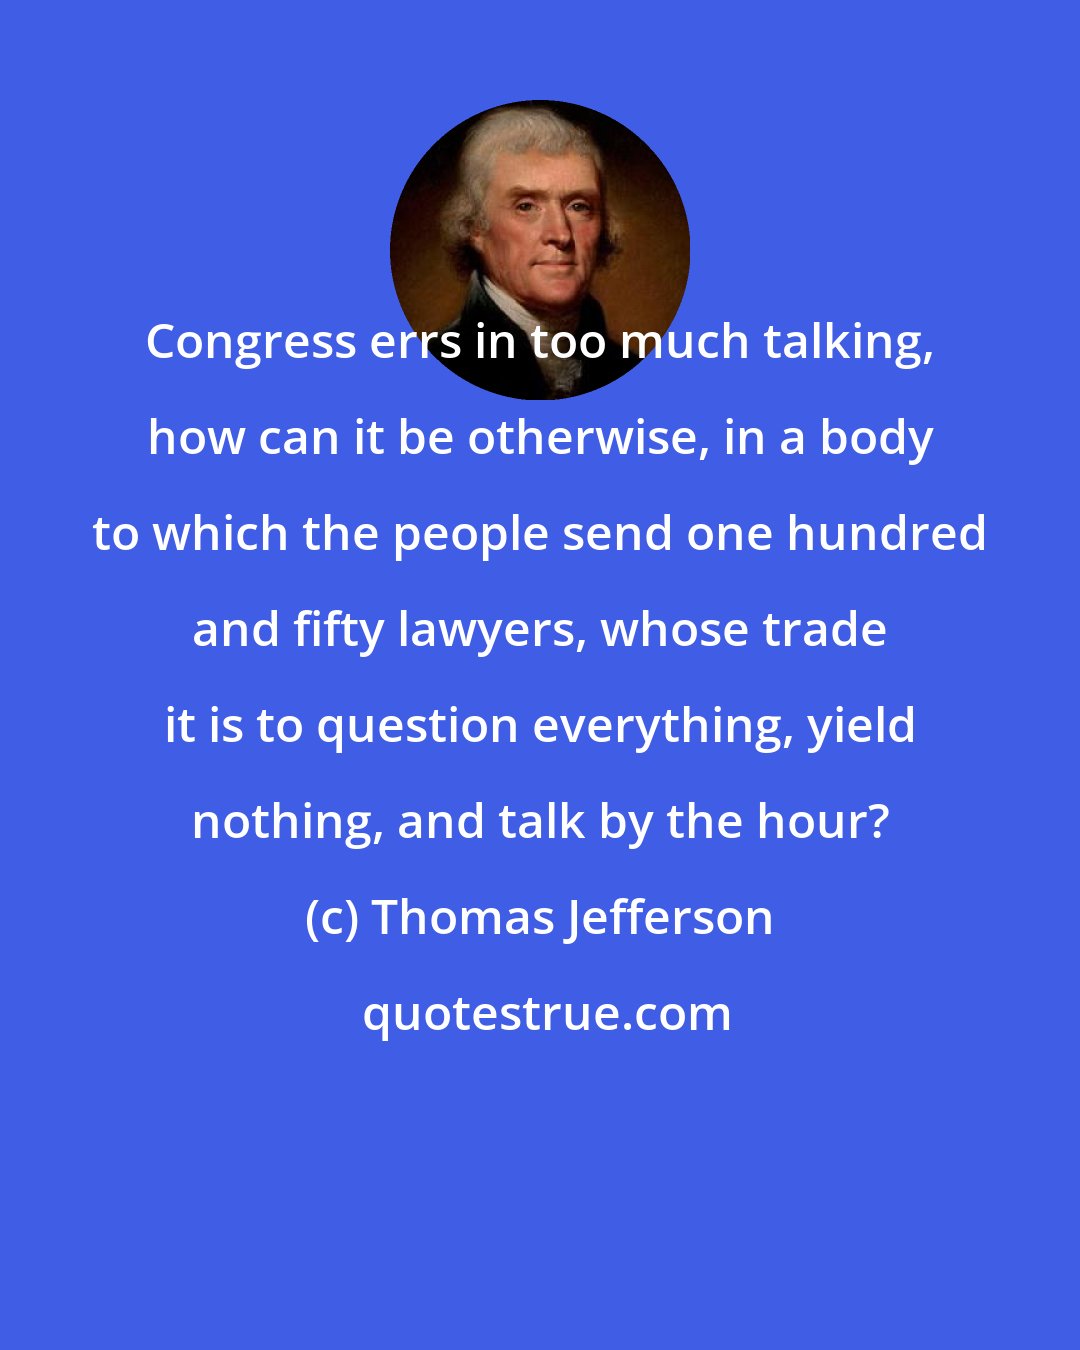 Thomas Jefferson: Congress errs in too much talking, how can it be otherwise, in a body to which the people send one hundred and fifty lawyers, whose trade it is to question everything, yield nothing, and talk by the hour?